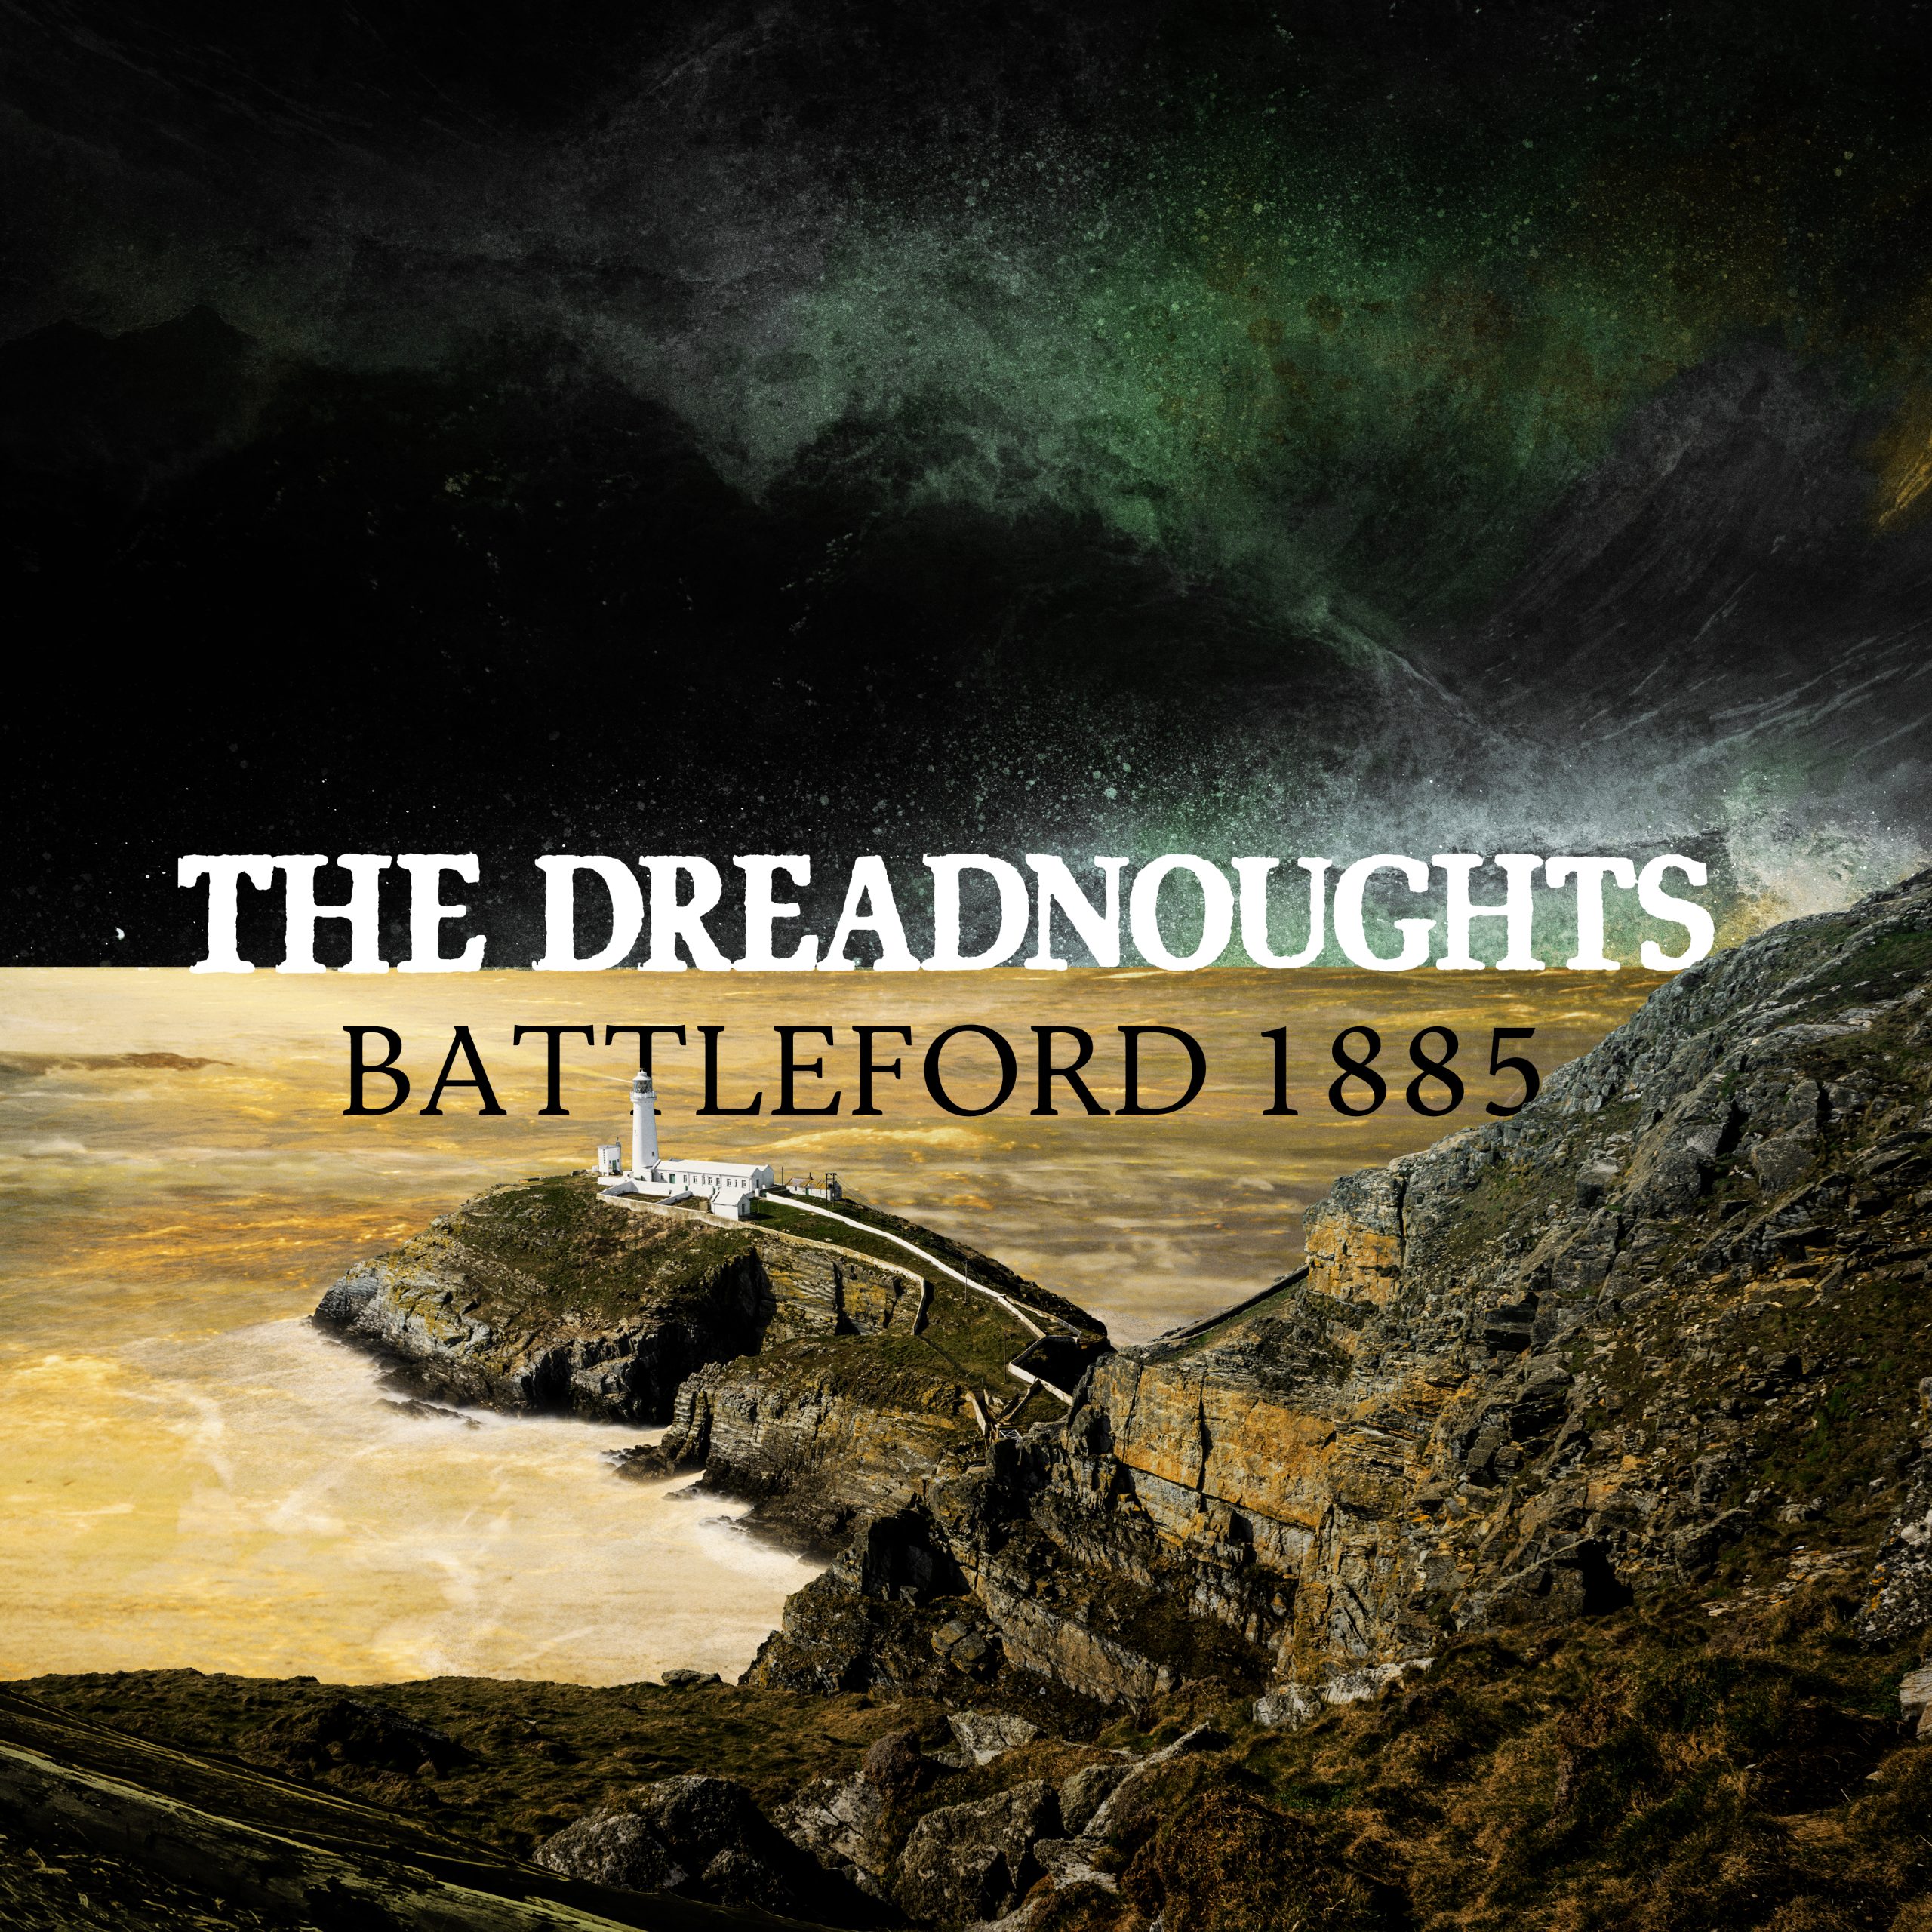 The Dreadnoughts Release Tribute to Cree Warriors with “Battleford 1885” // Celtic Punk